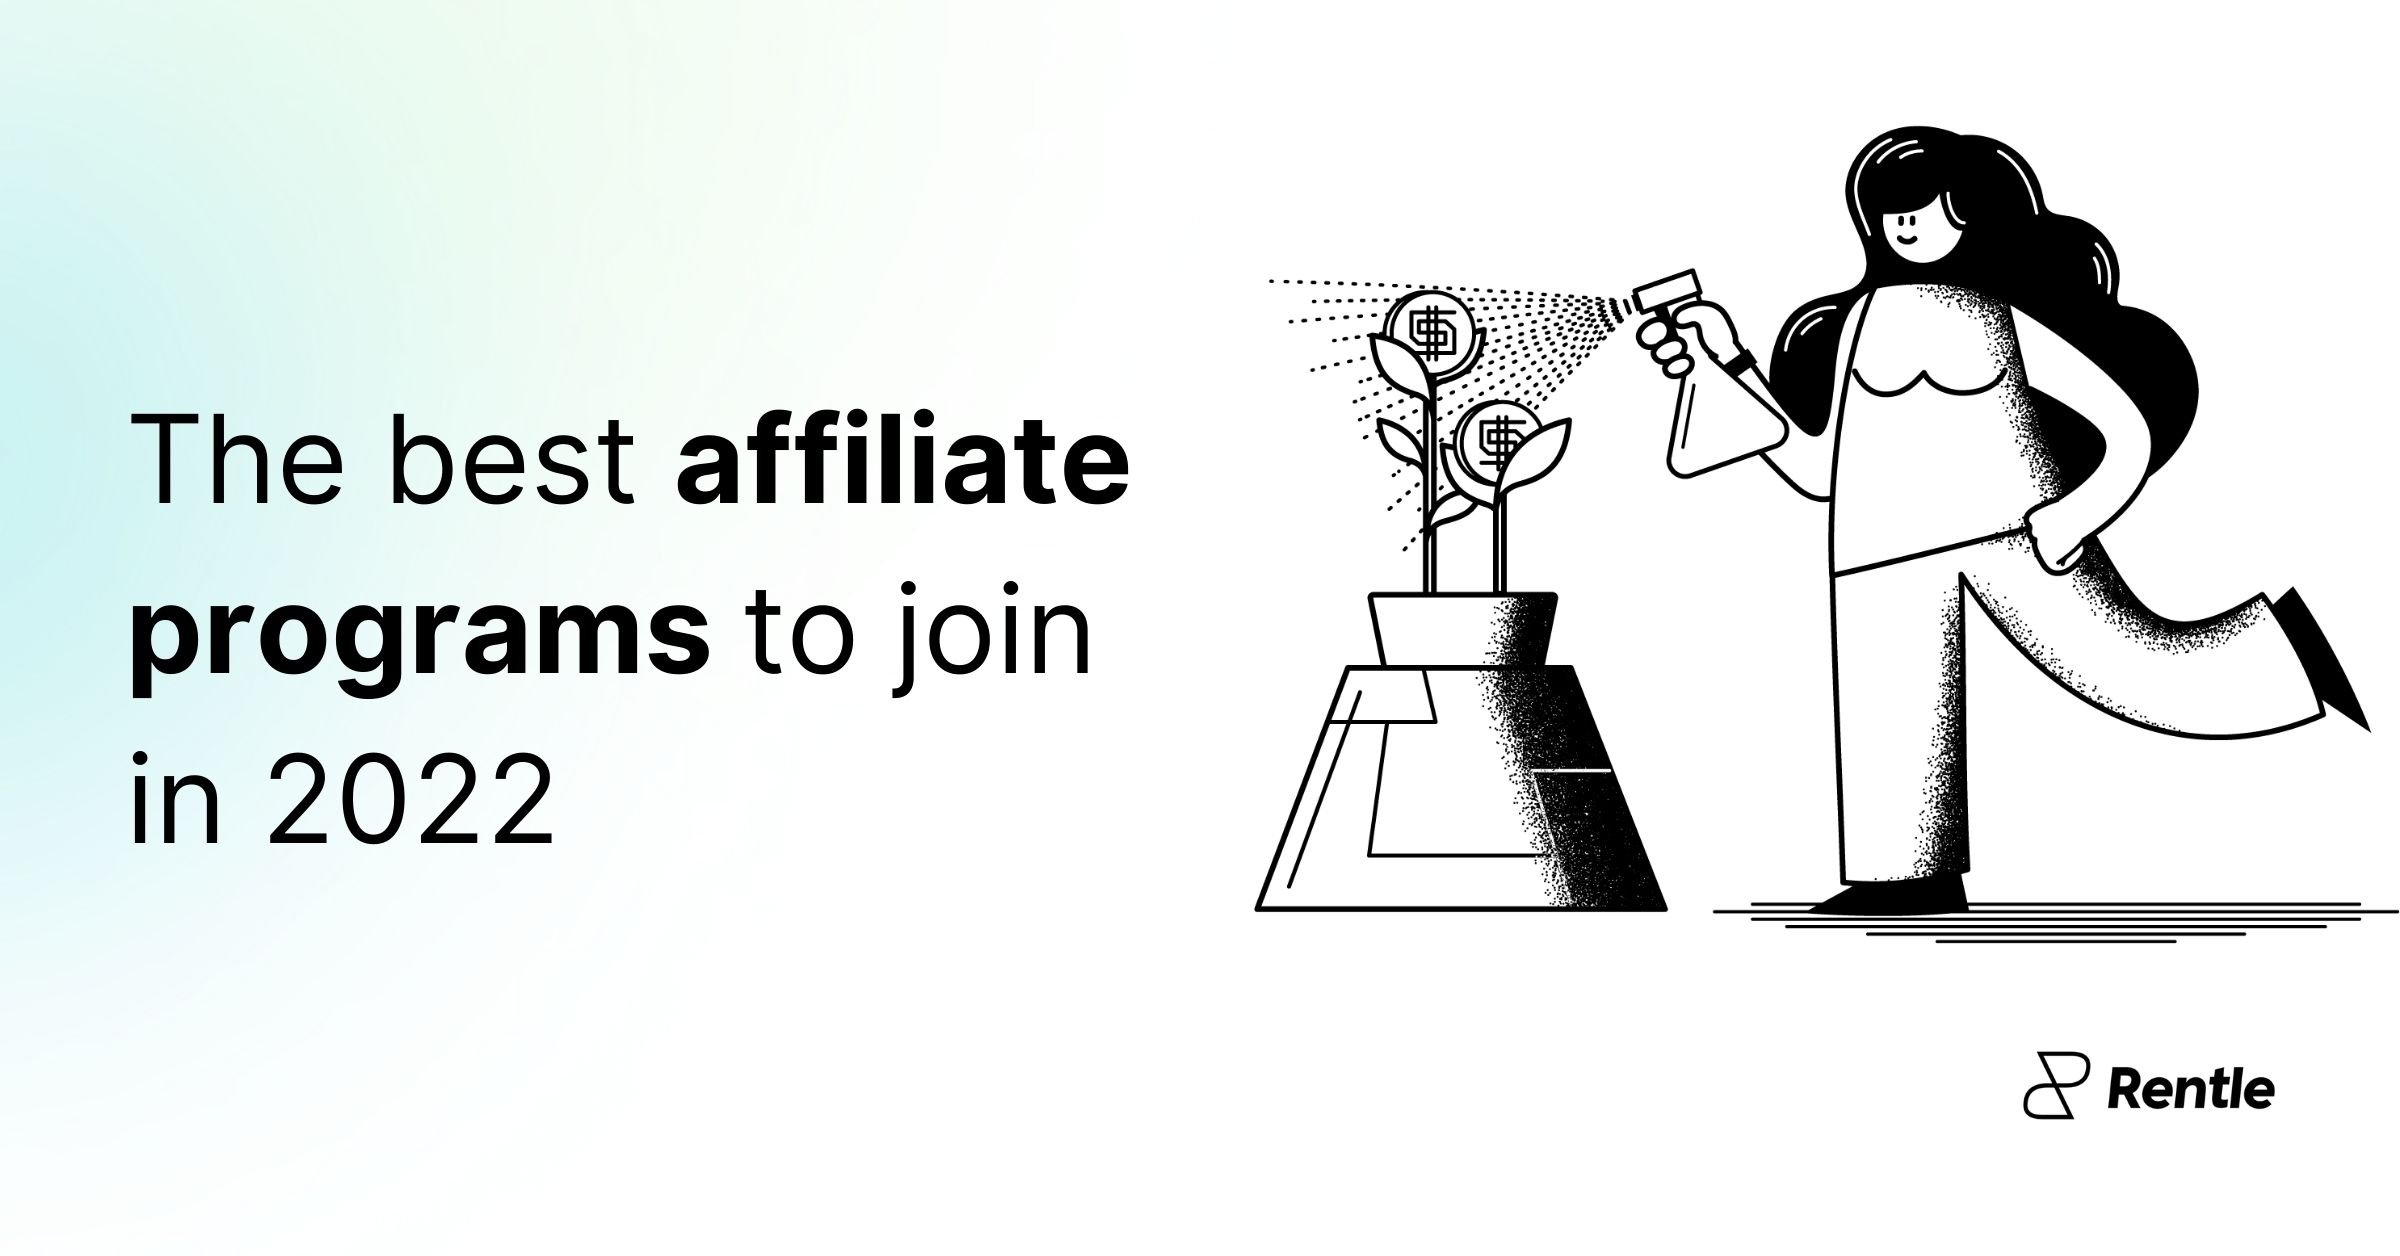 blog-the-best-affiliate-programs-to-join-in-2022